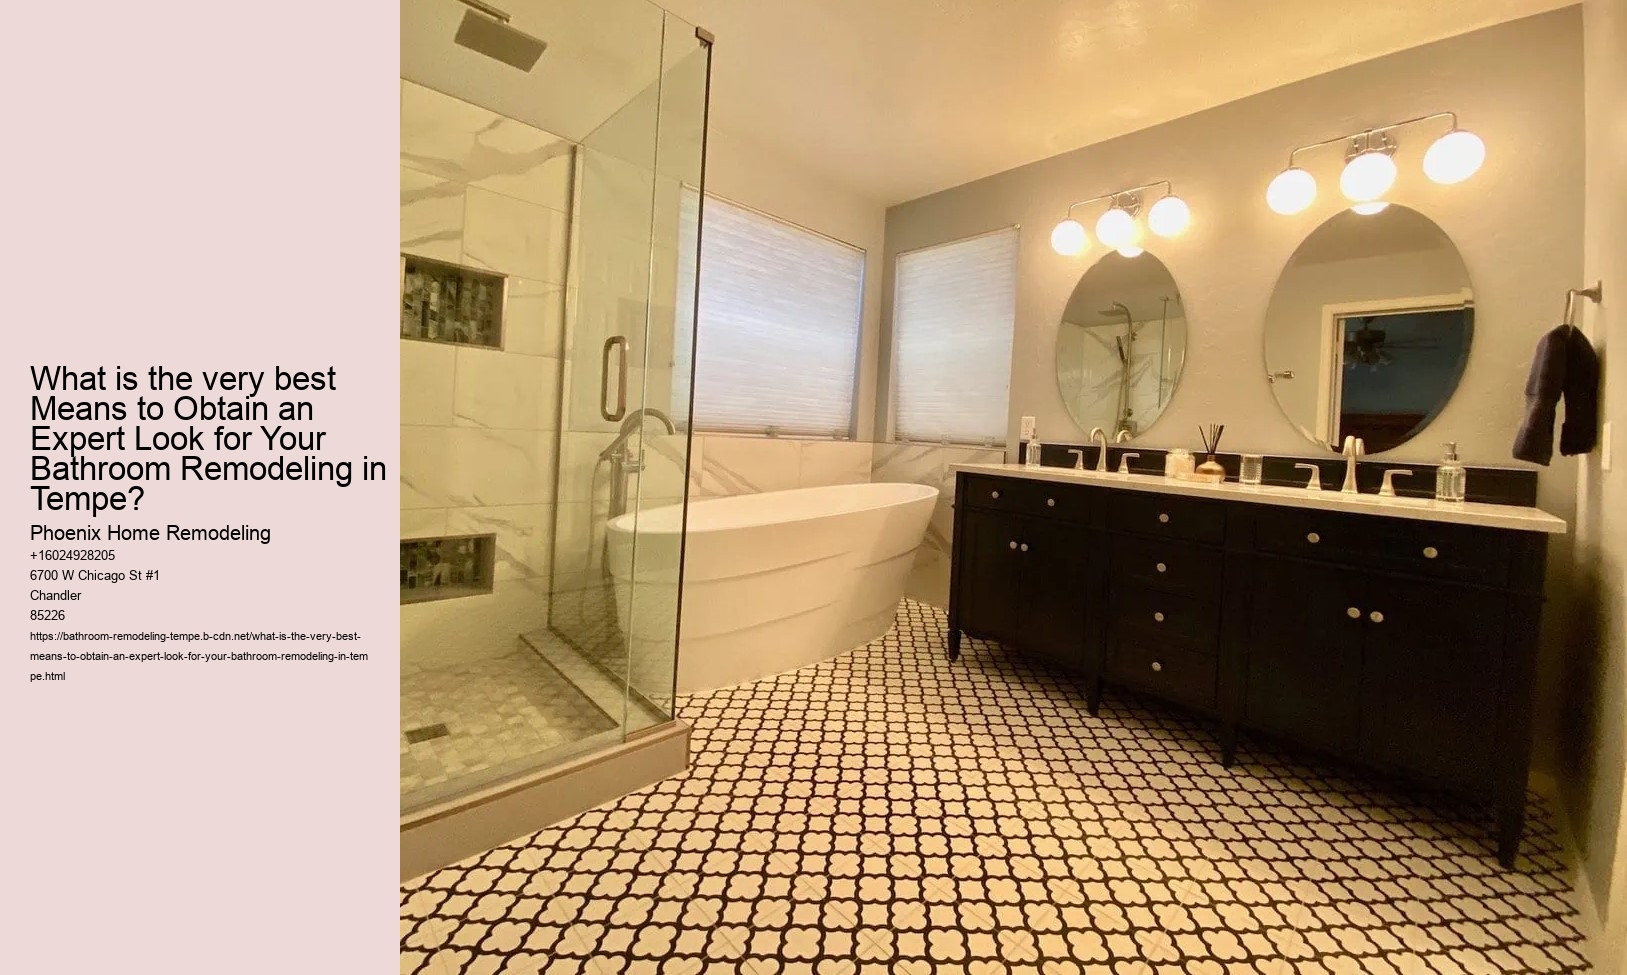 What is the very best Means to Obtain an Expert Look for Your Bathroom Remodeling in Tempe?